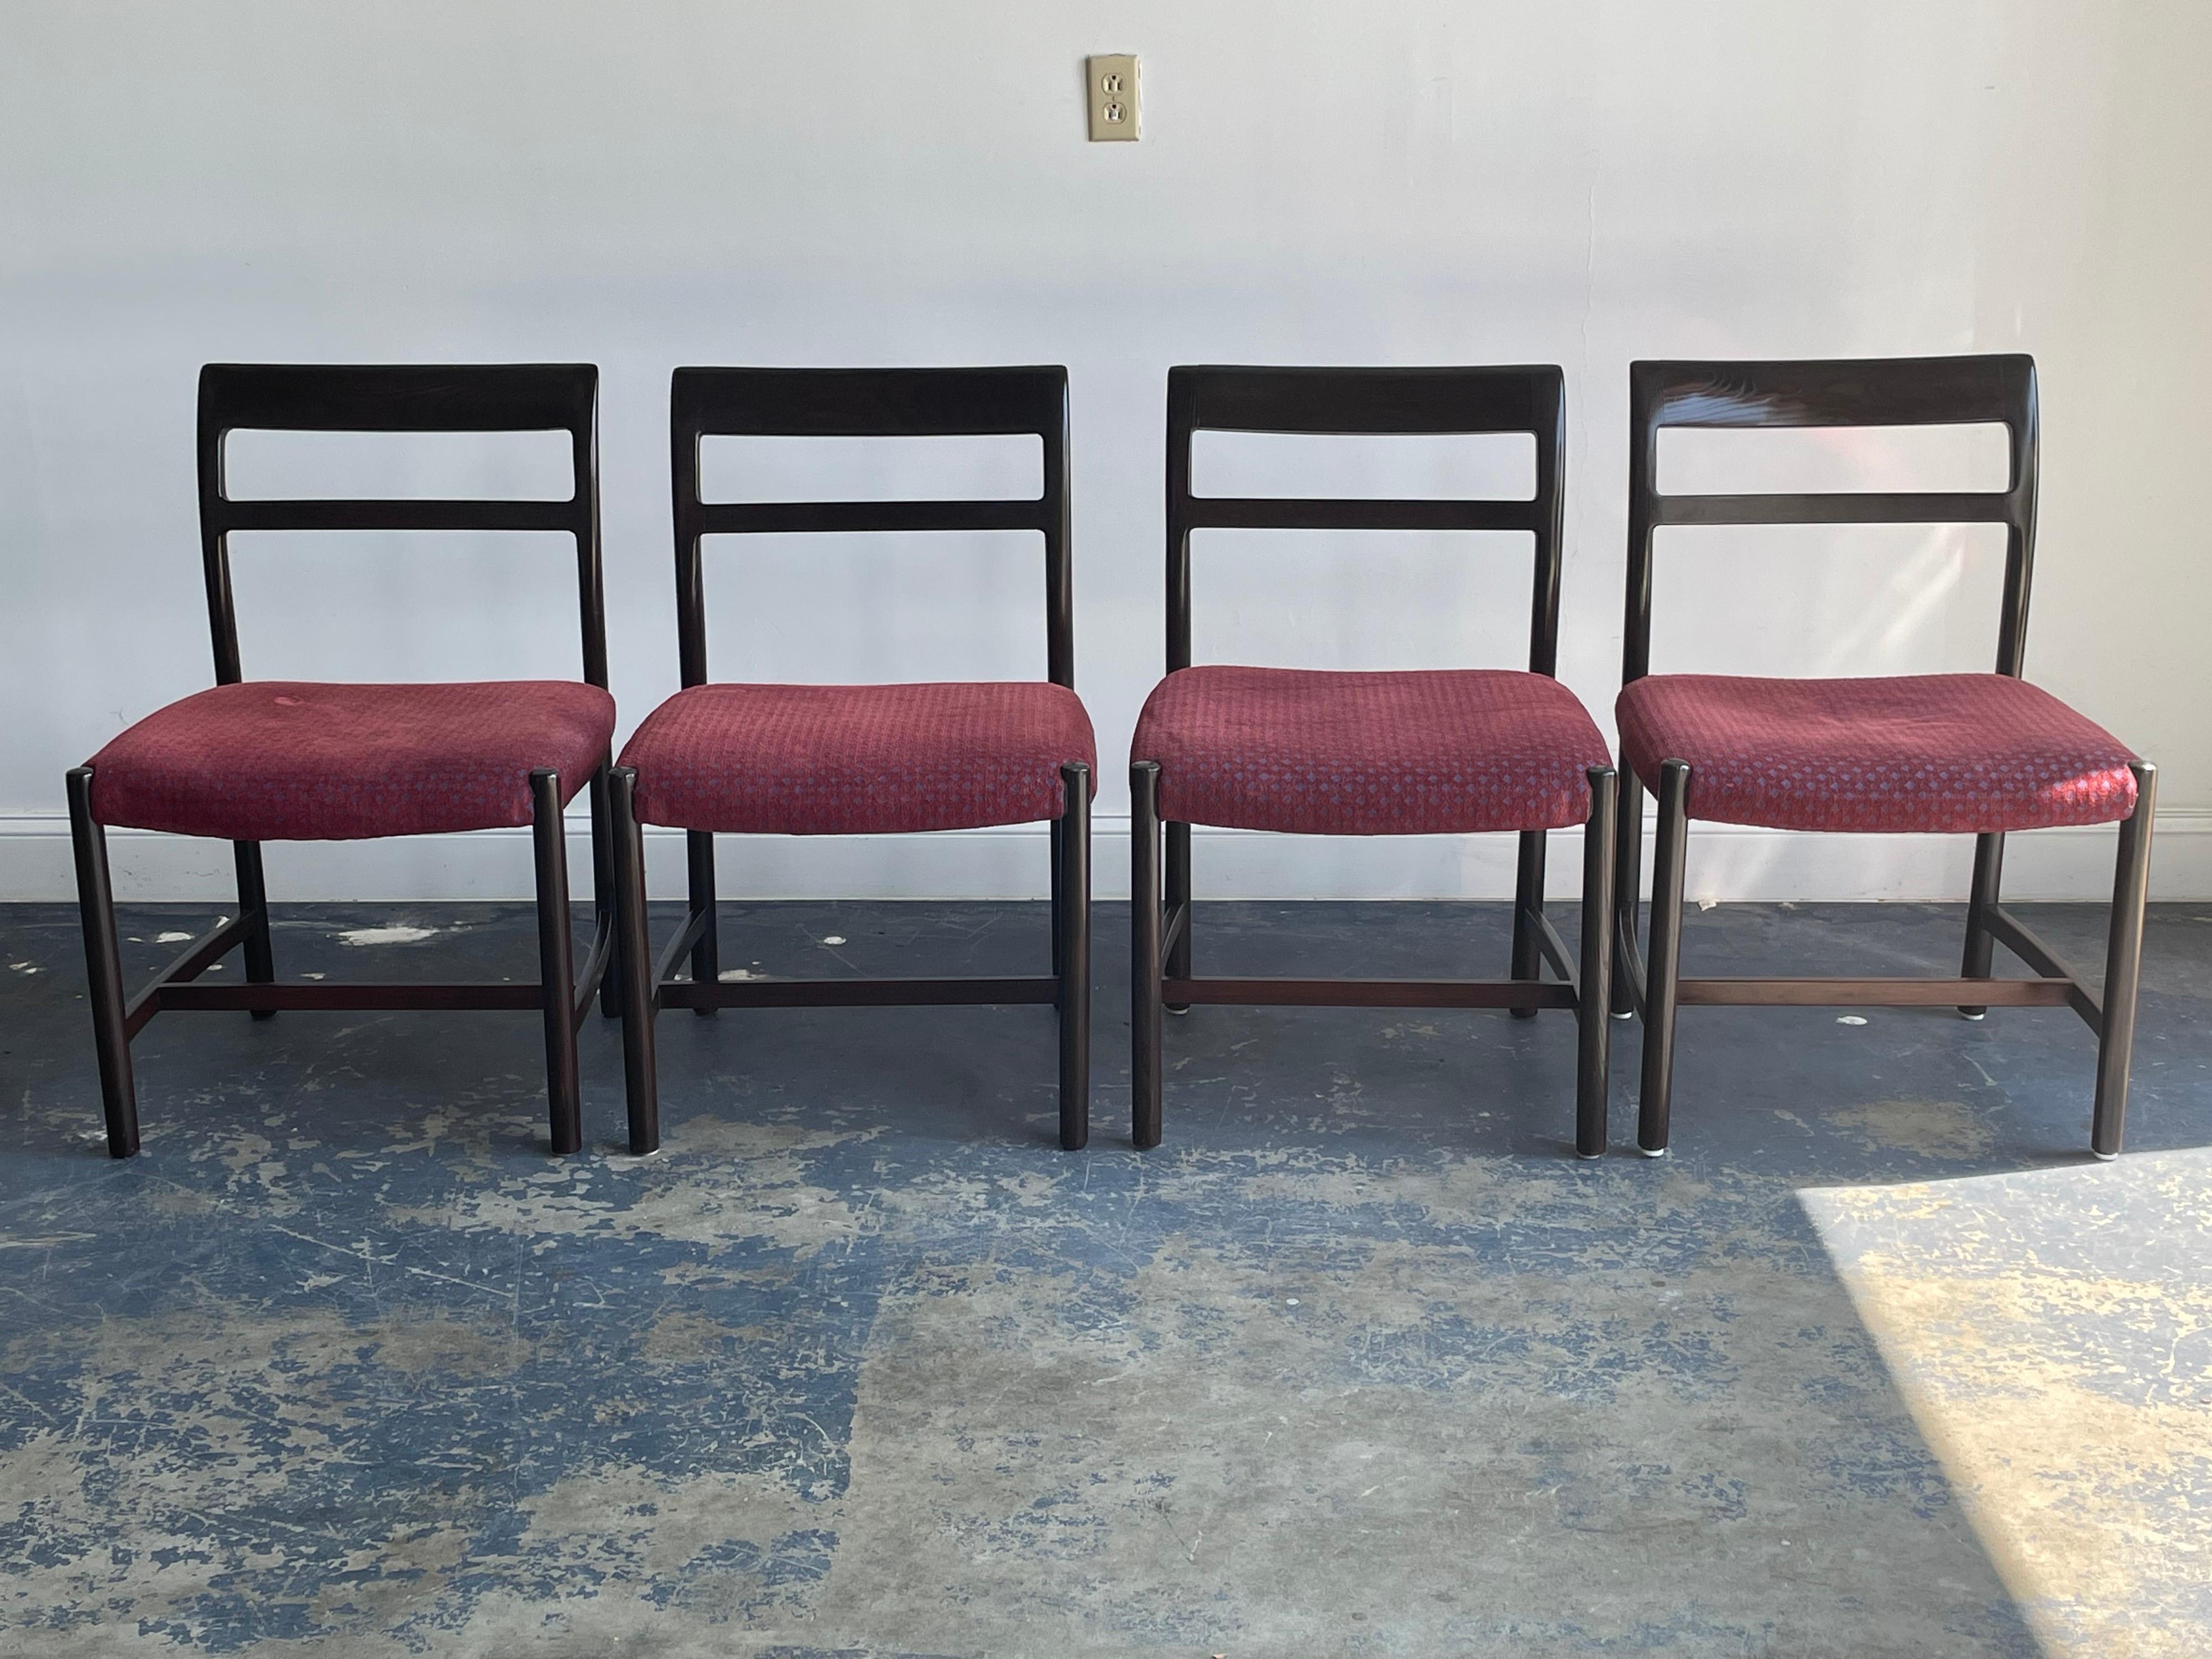 Wonderful set of four side chairs designed by Roger Sprunger for Dunbar in a dark stained ash.